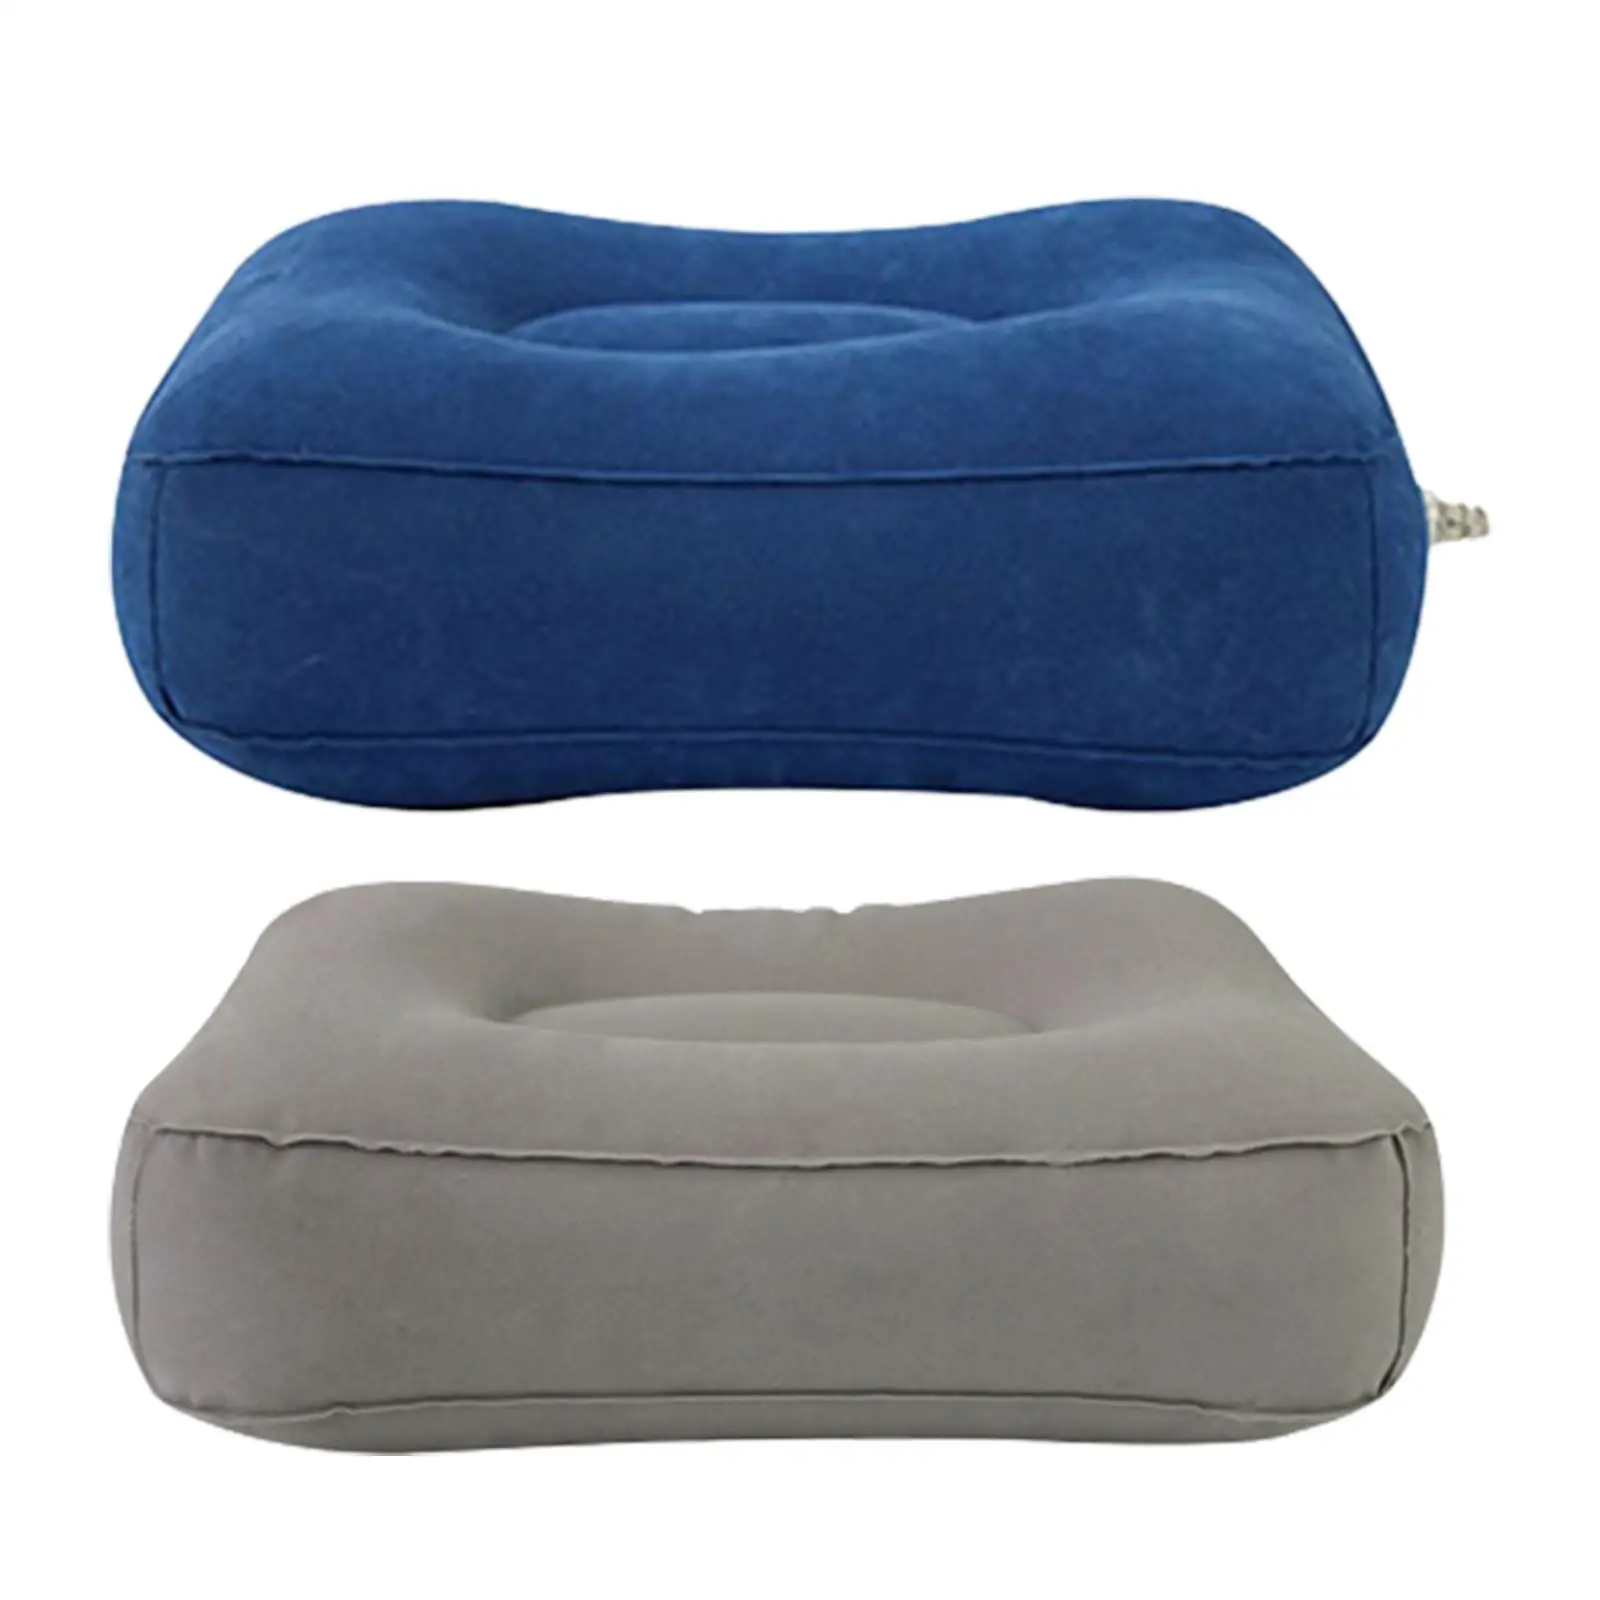 Foot Rest Pillow Foot Rest Cushion Inflatable Foot Rest Mat Inflatable Stool Ottoman for Airplane Camping Mat Train Office Home